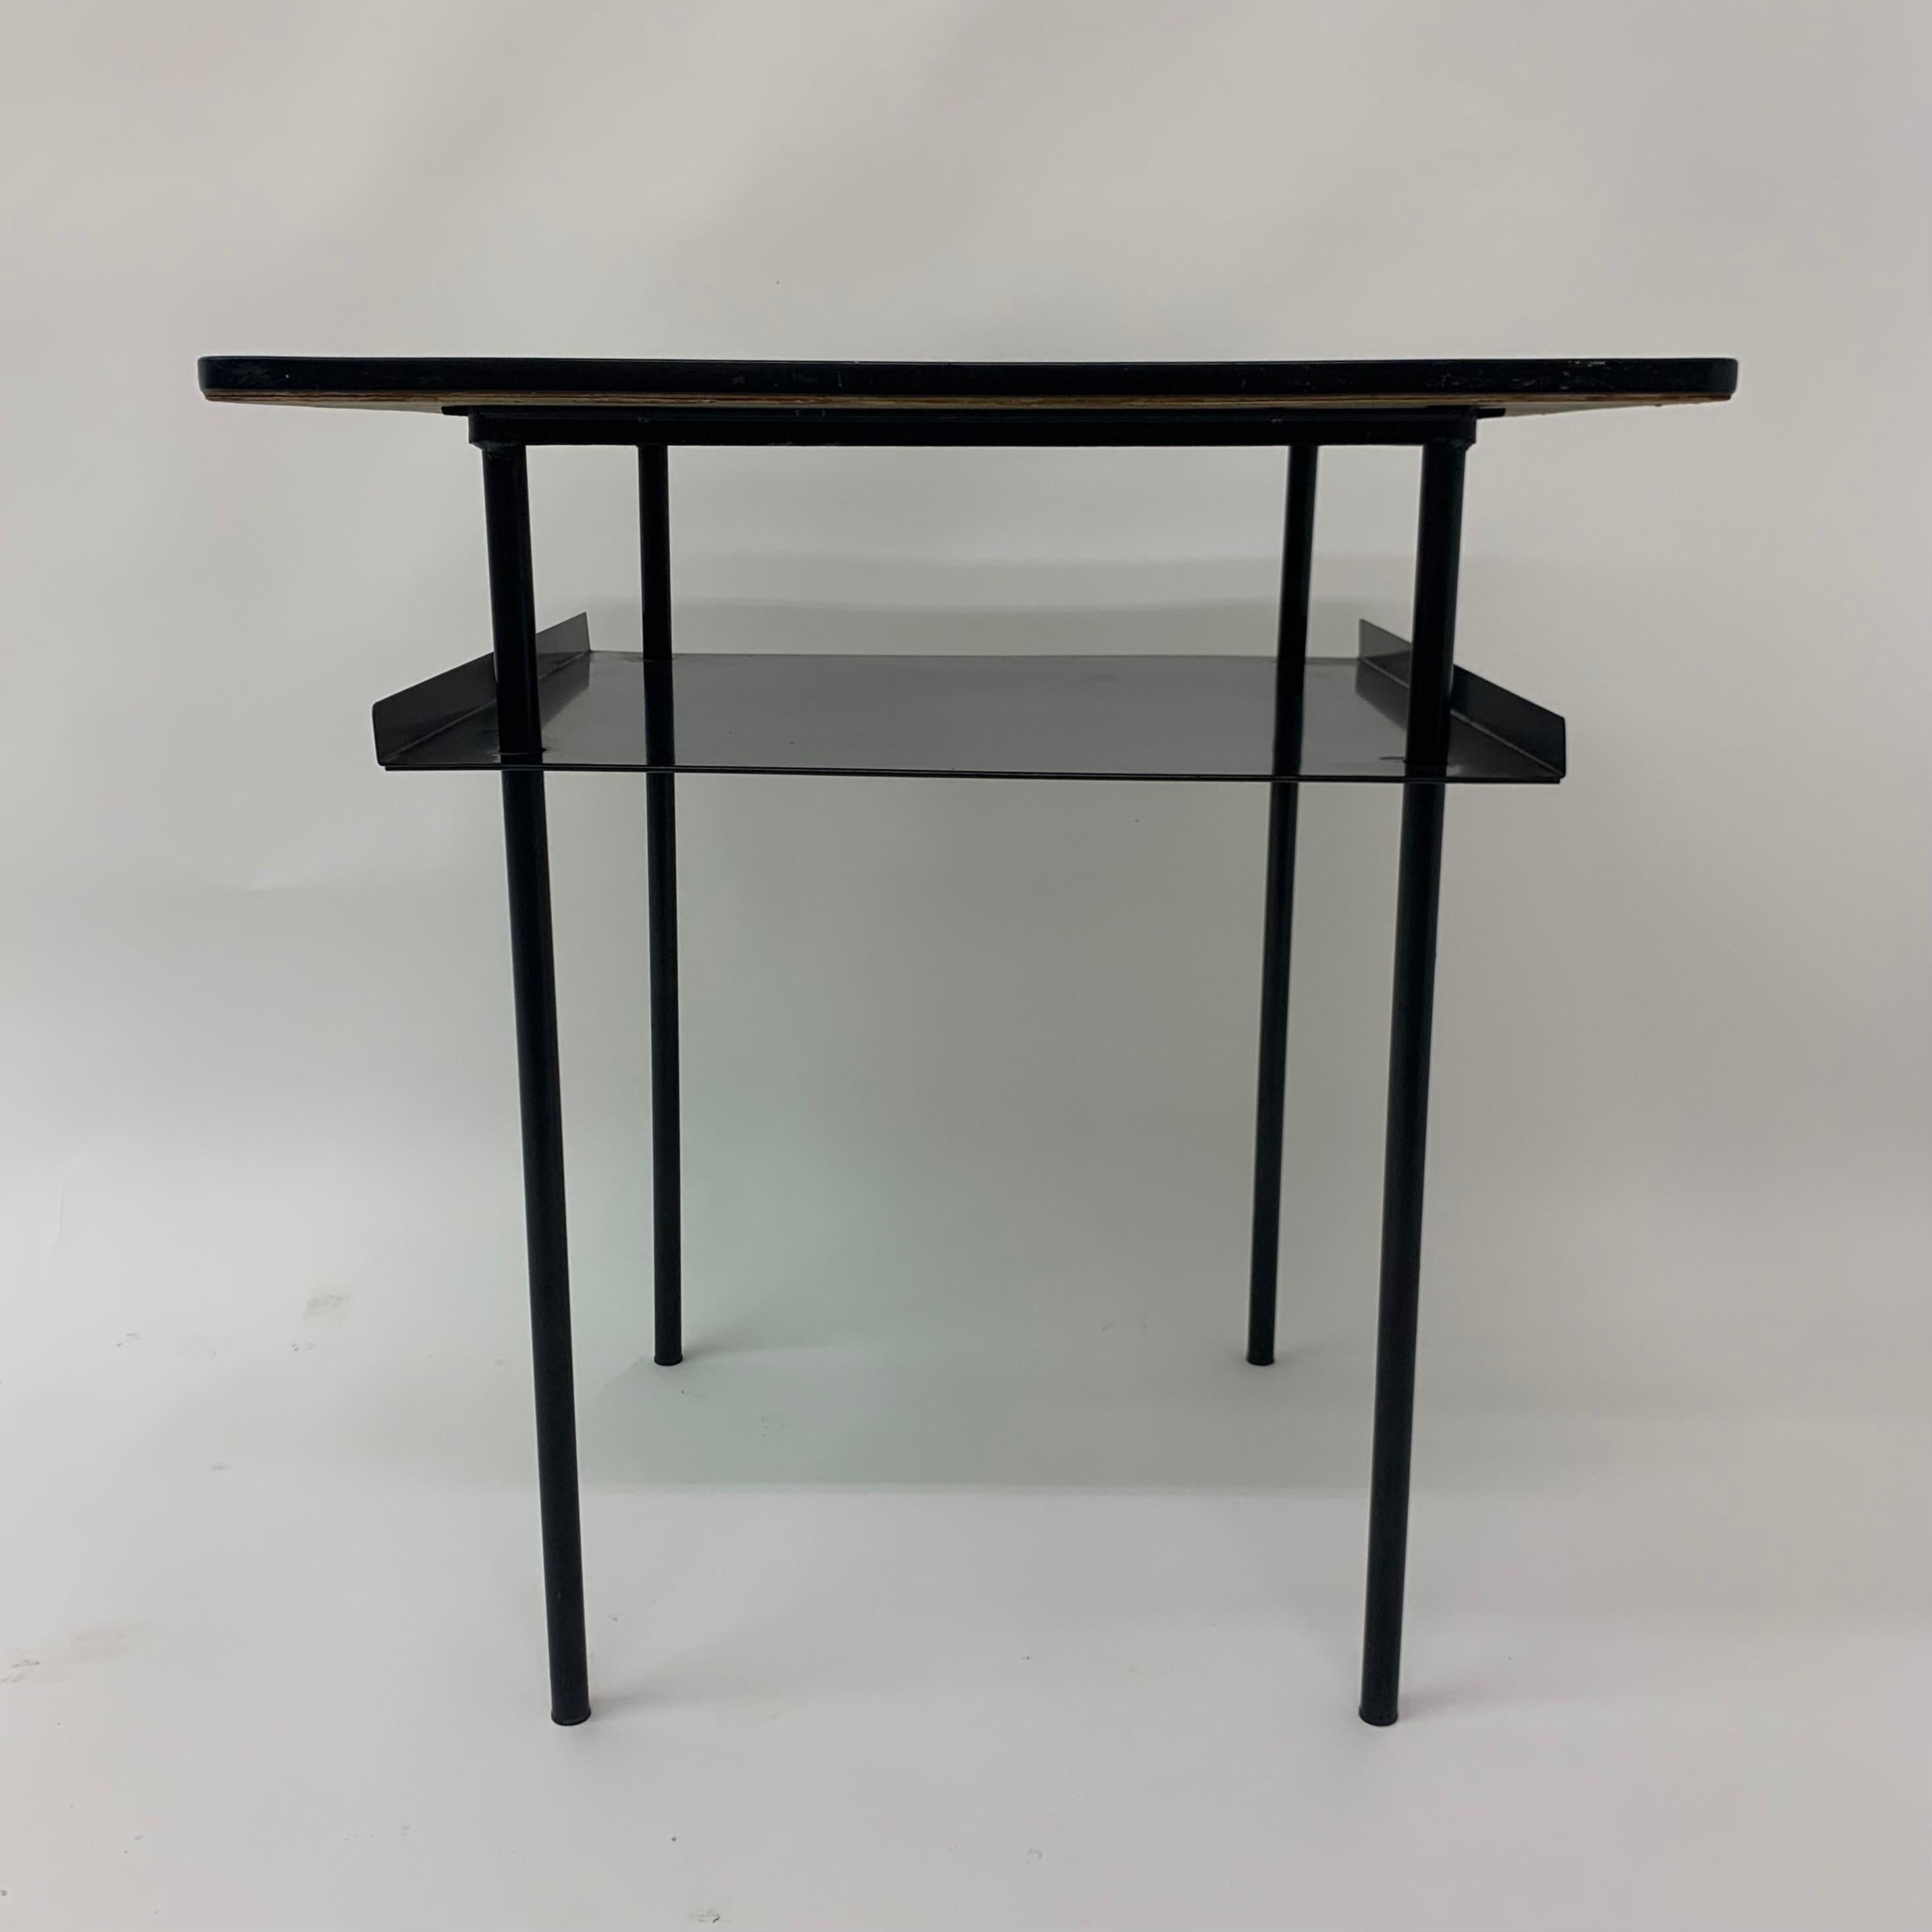 Mid-Century Modernist side table by Wim Rietveld for Auping, 1950s.